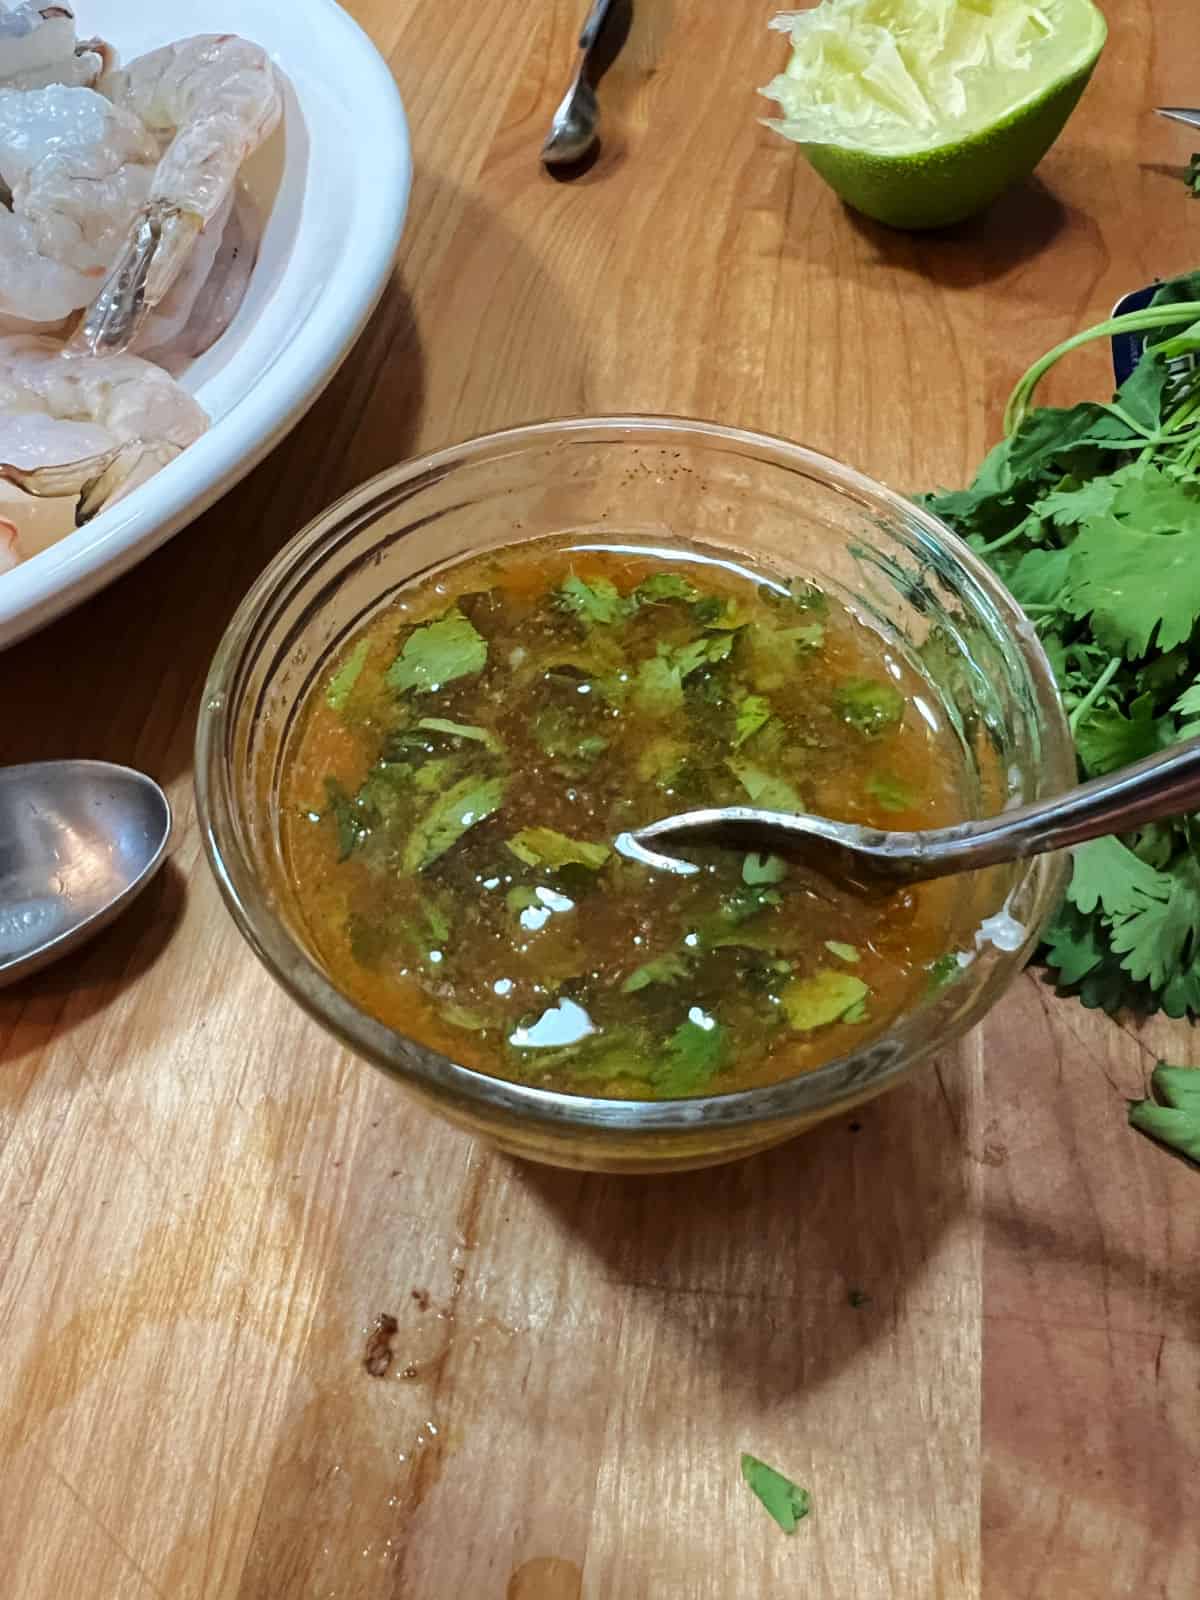 Marinade in a small cup.